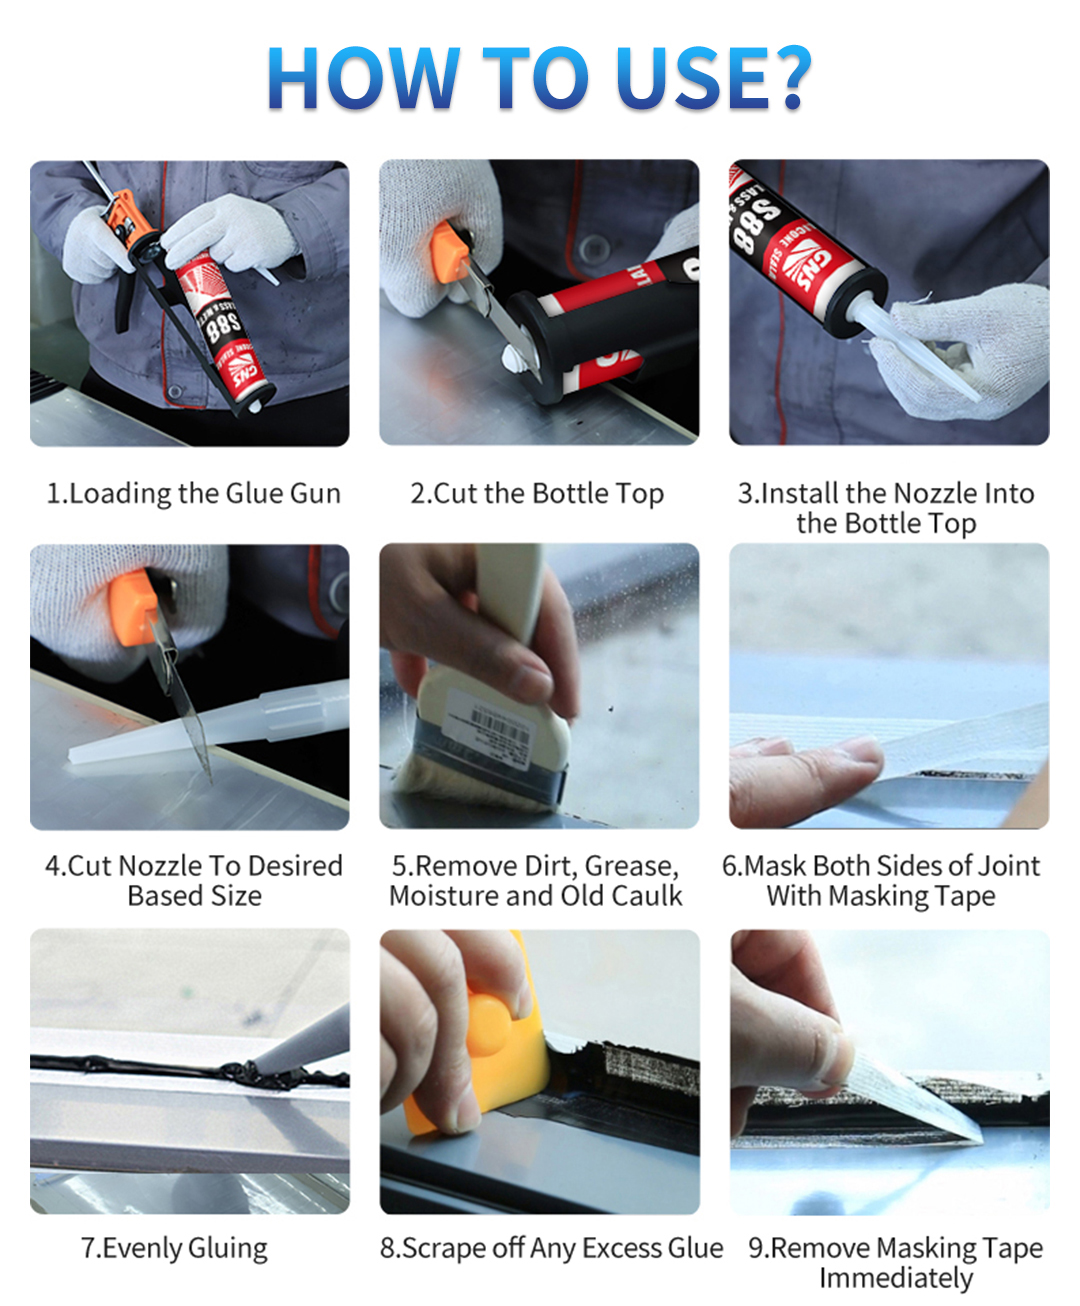 Glass and Metal Silicone Sealant